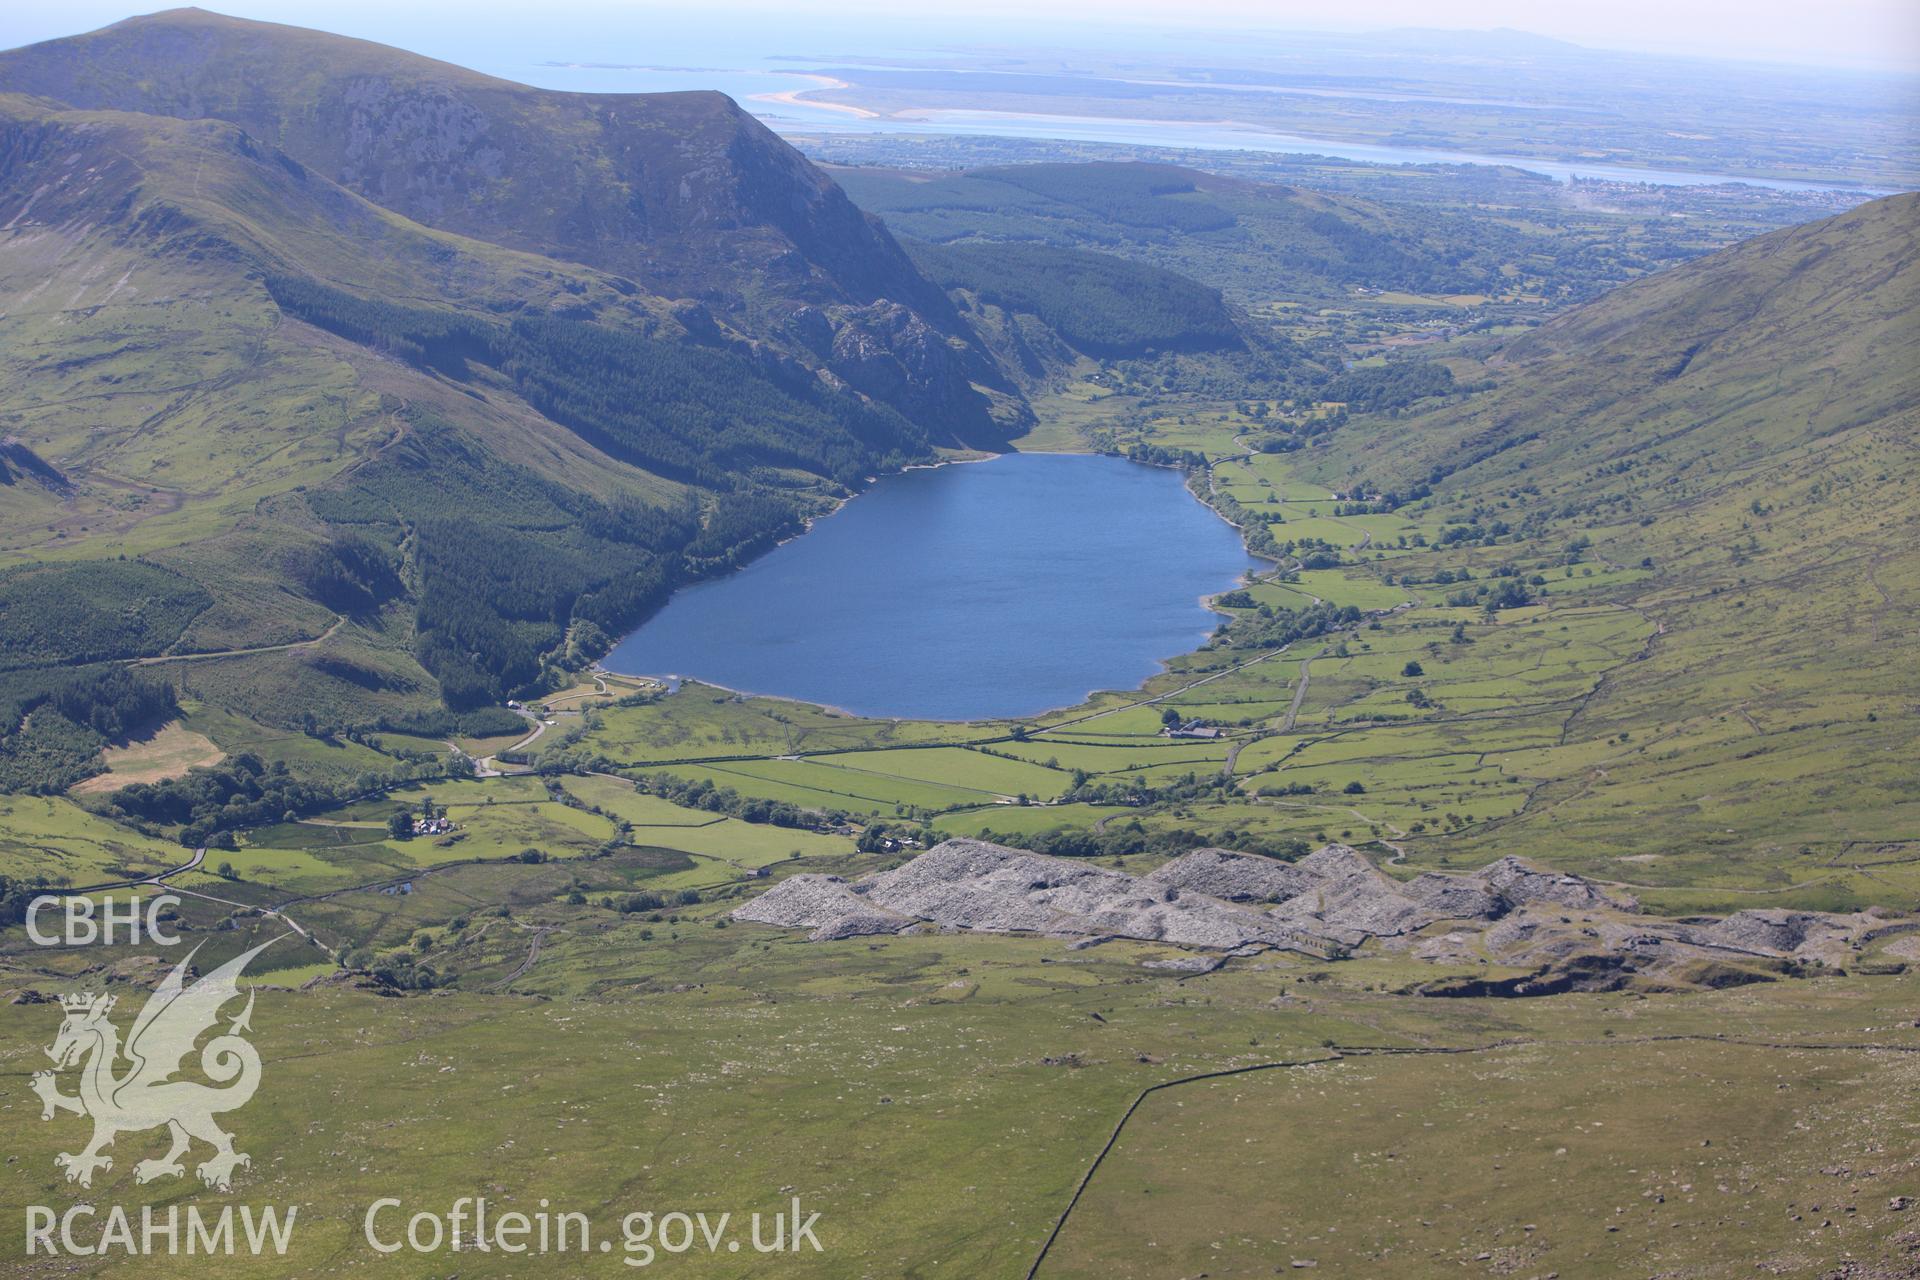 RCAHMW colour oblique photograph of Llyn Cwellyn. Taken by Toby Driver on 16/06/2010.